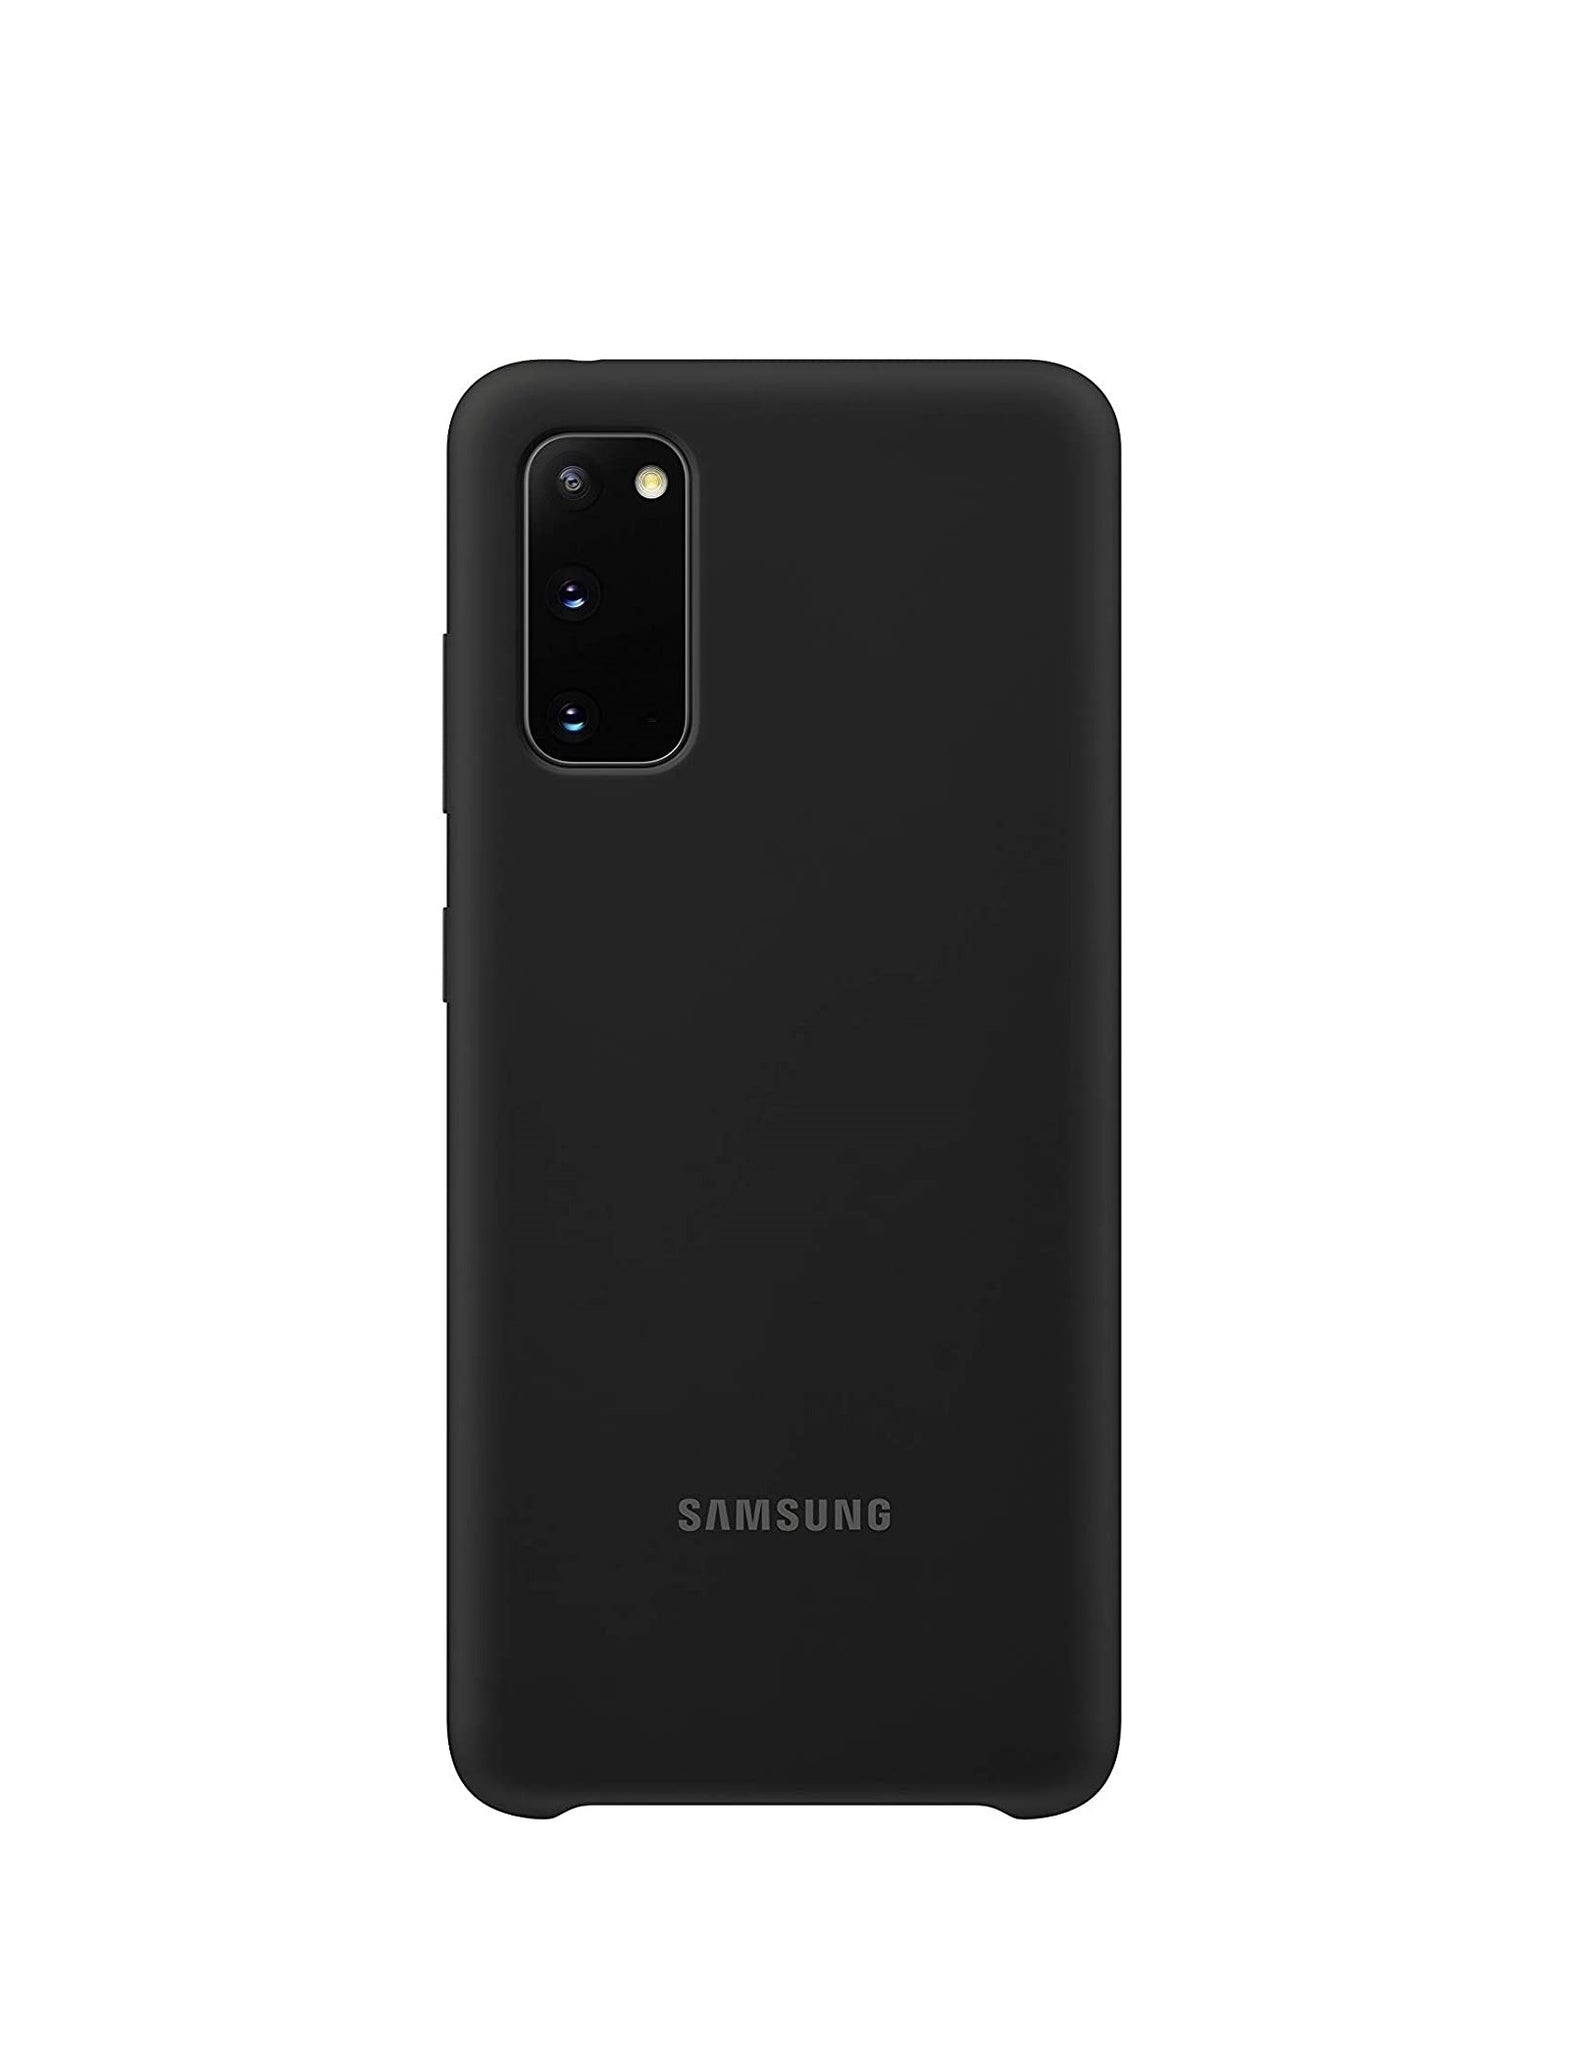 https://caserace.net/products/samsung-galaxy-s20-silicon-cover-black